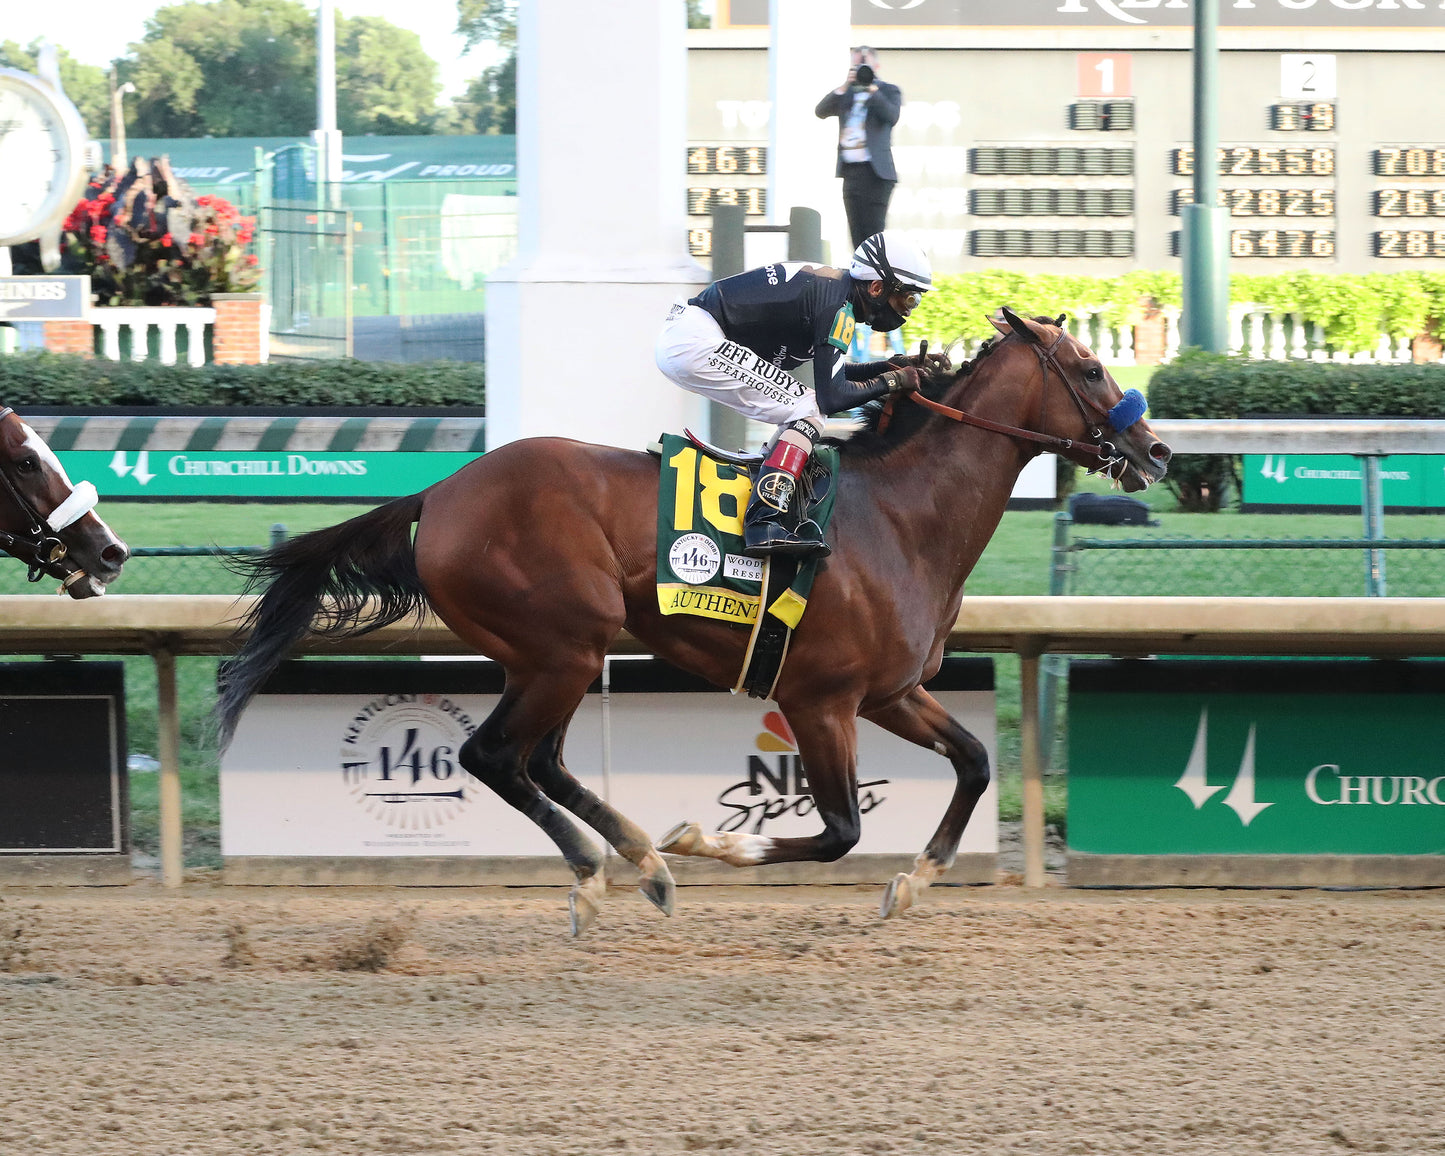 AUTHENTIC - The Kentucky Derby - 146th Running - 09-05-20 - R14 - CD - Finish 04